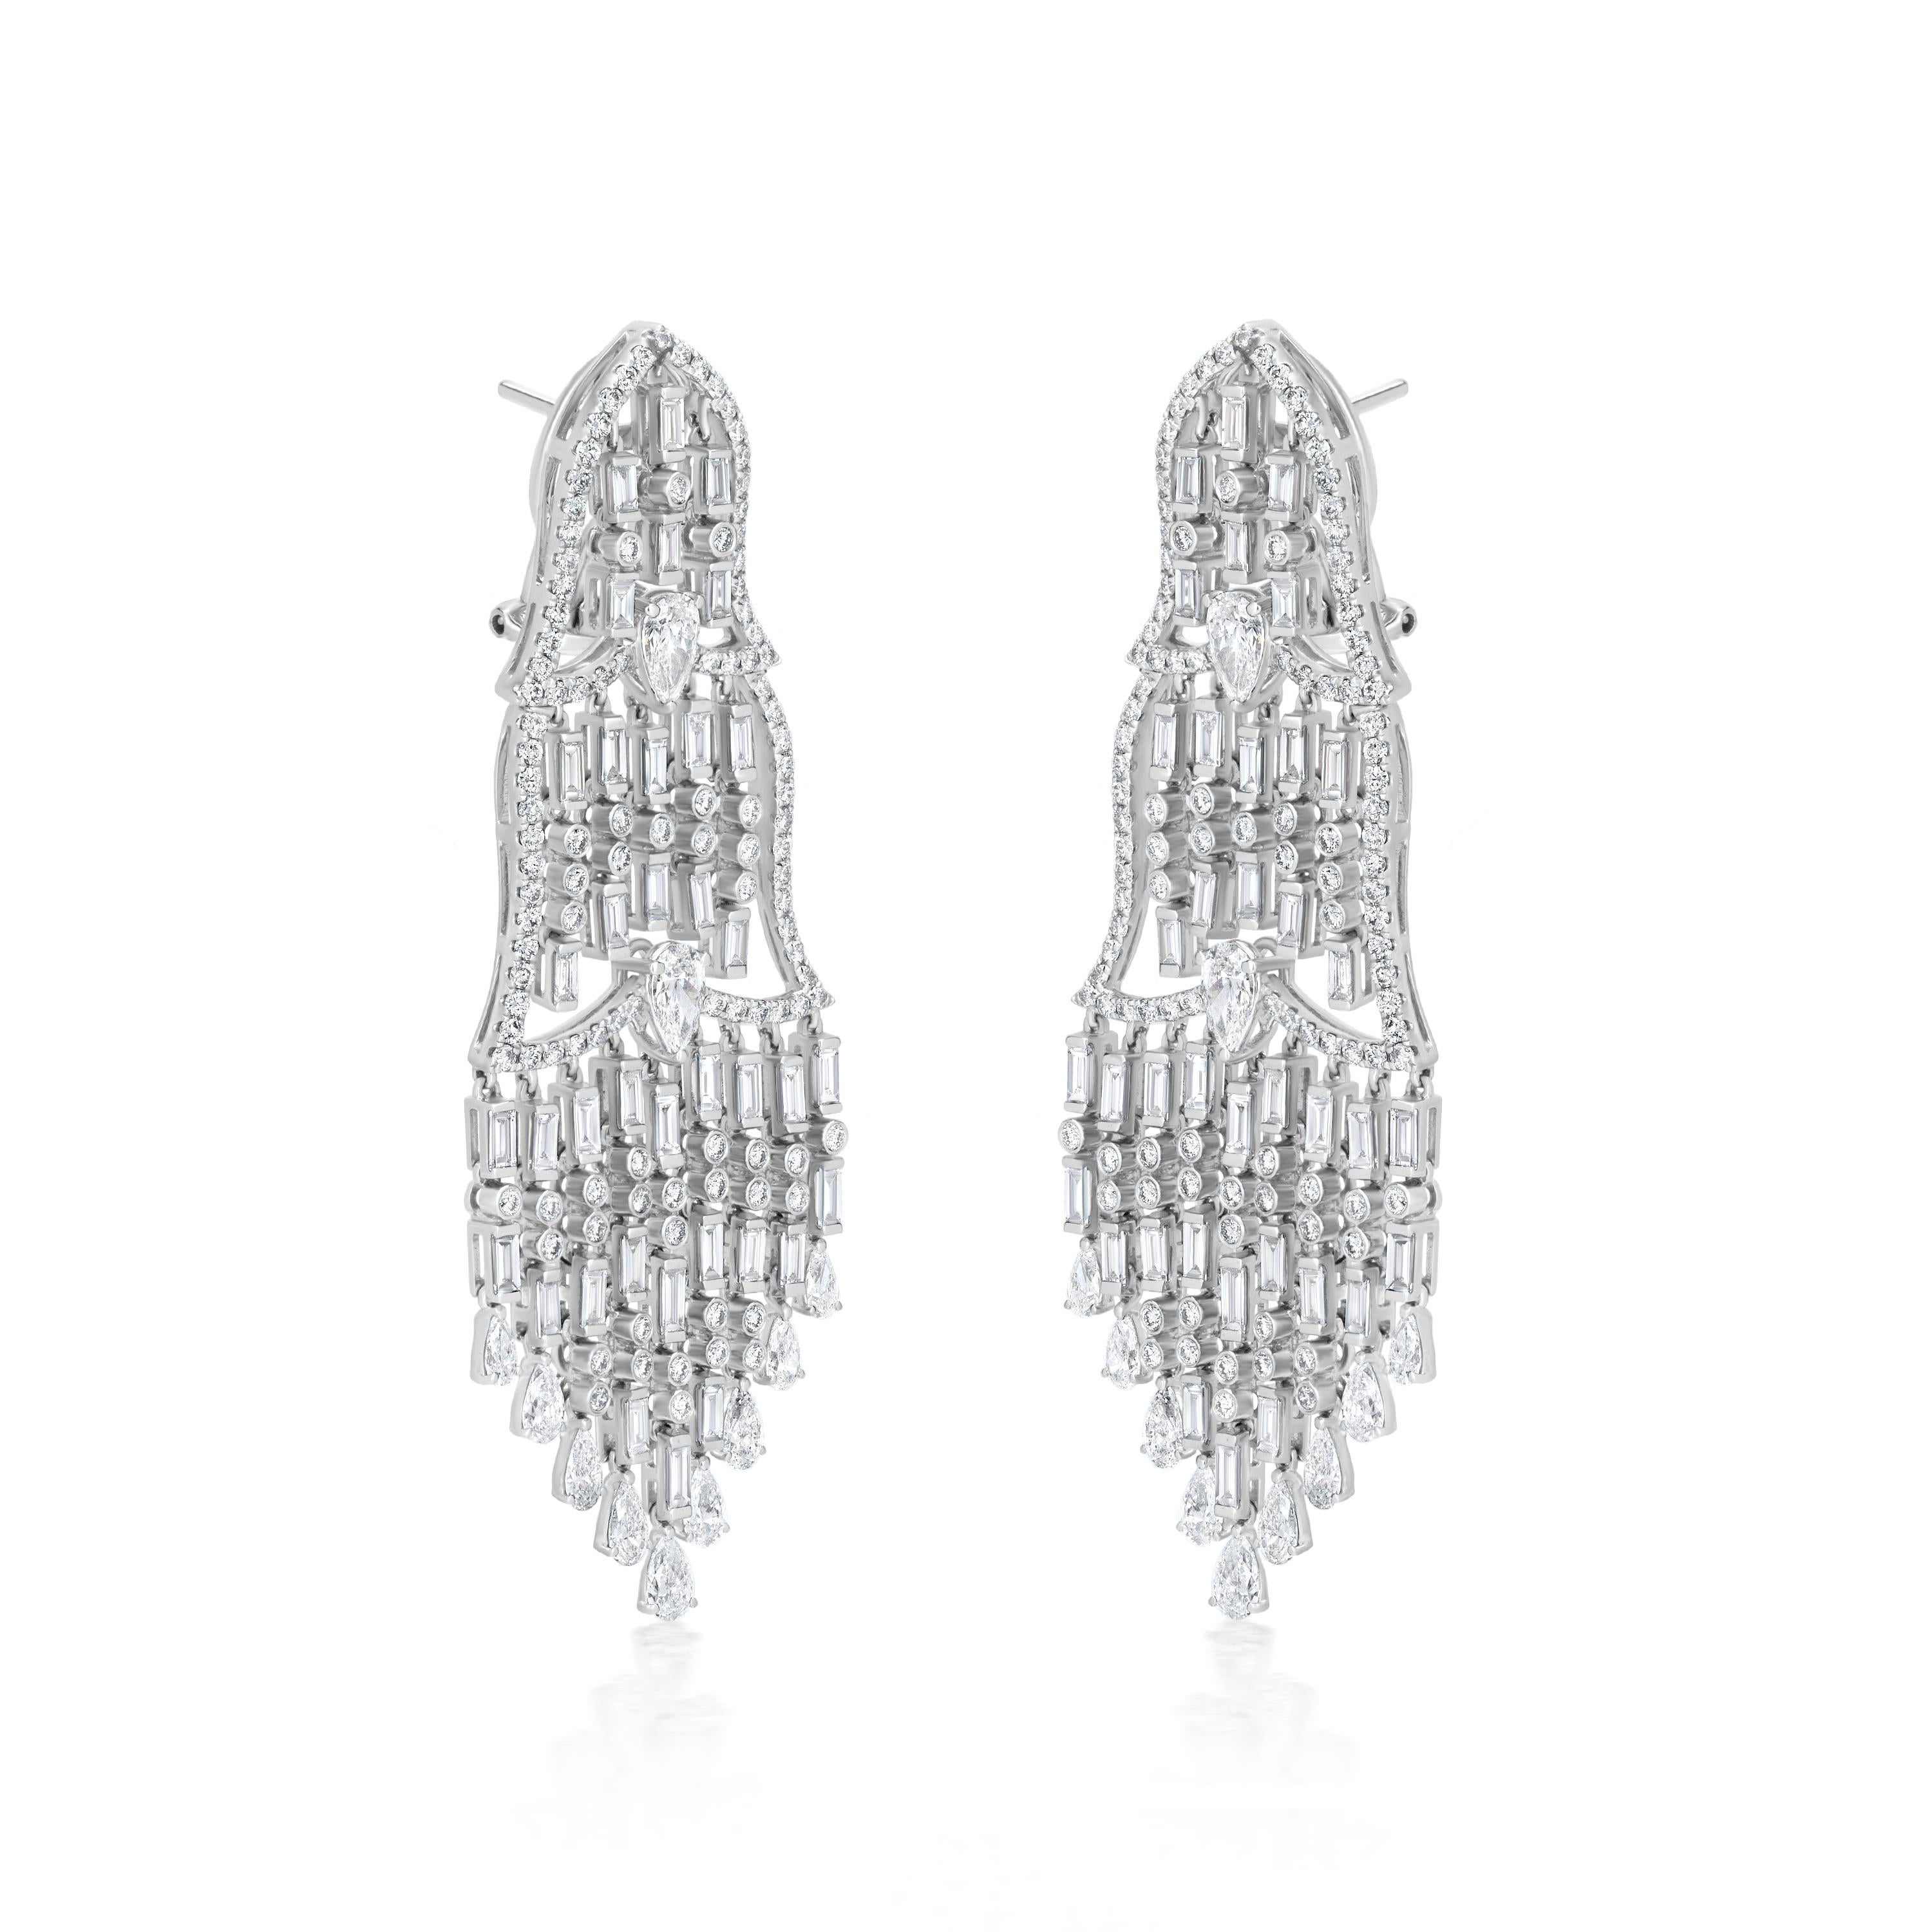 Our Nigaam 8.13 Cttw. Diamond Chandelier Earrings are the epitome of luxury and elegance. These earrings are crafted from the finest 18K white gold and feature a double diamond crown design on the top, with multiple diamond strands hanging elegantly